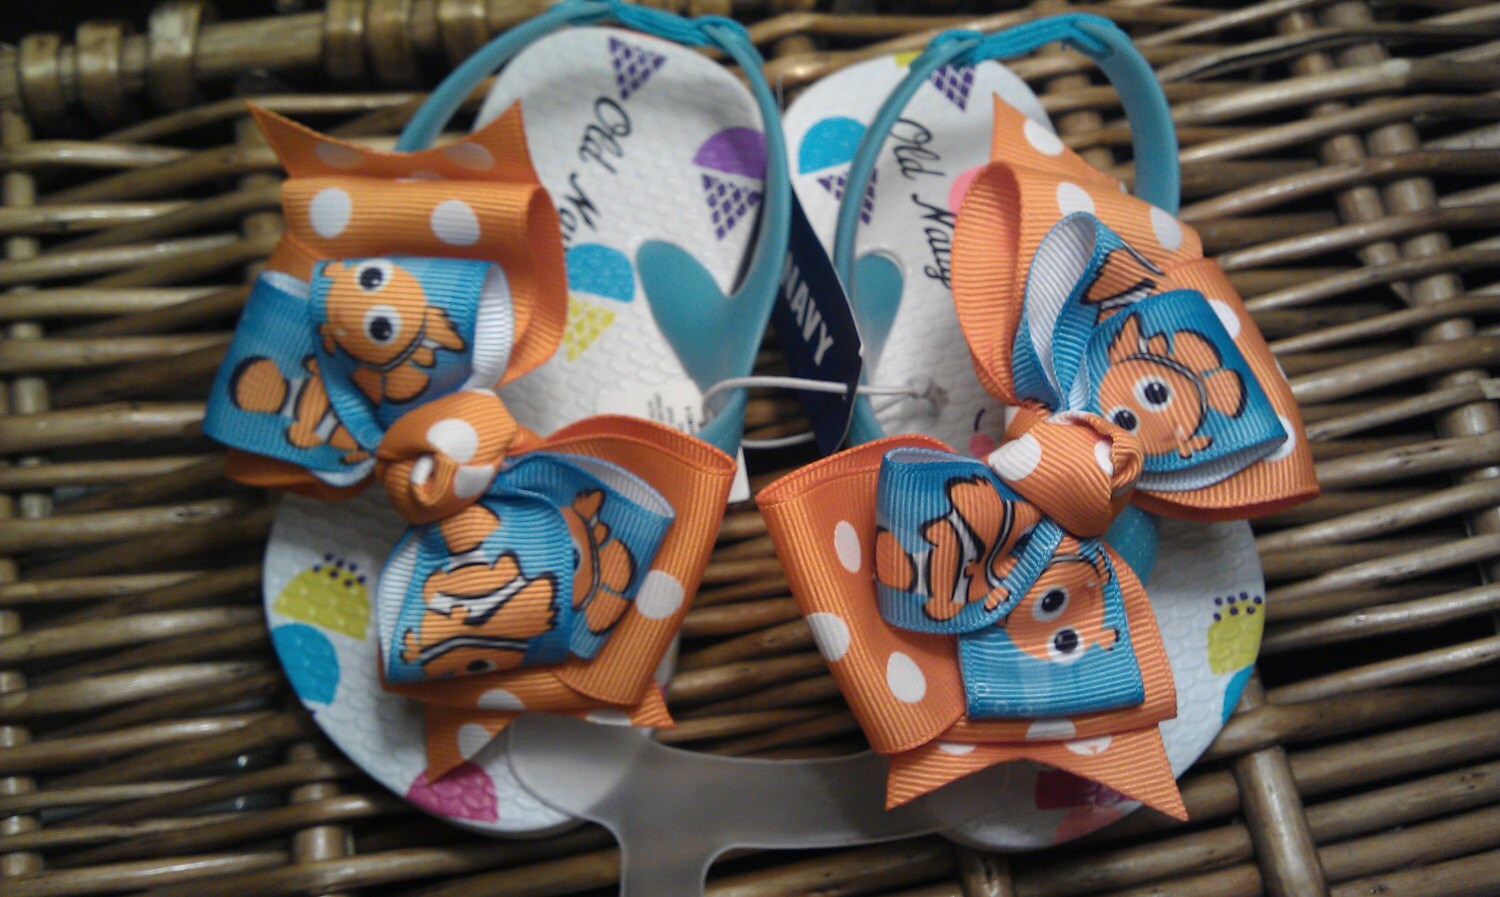 Finding Nemo Girl Flip Flop Sandals Toddler by AvelinCreations